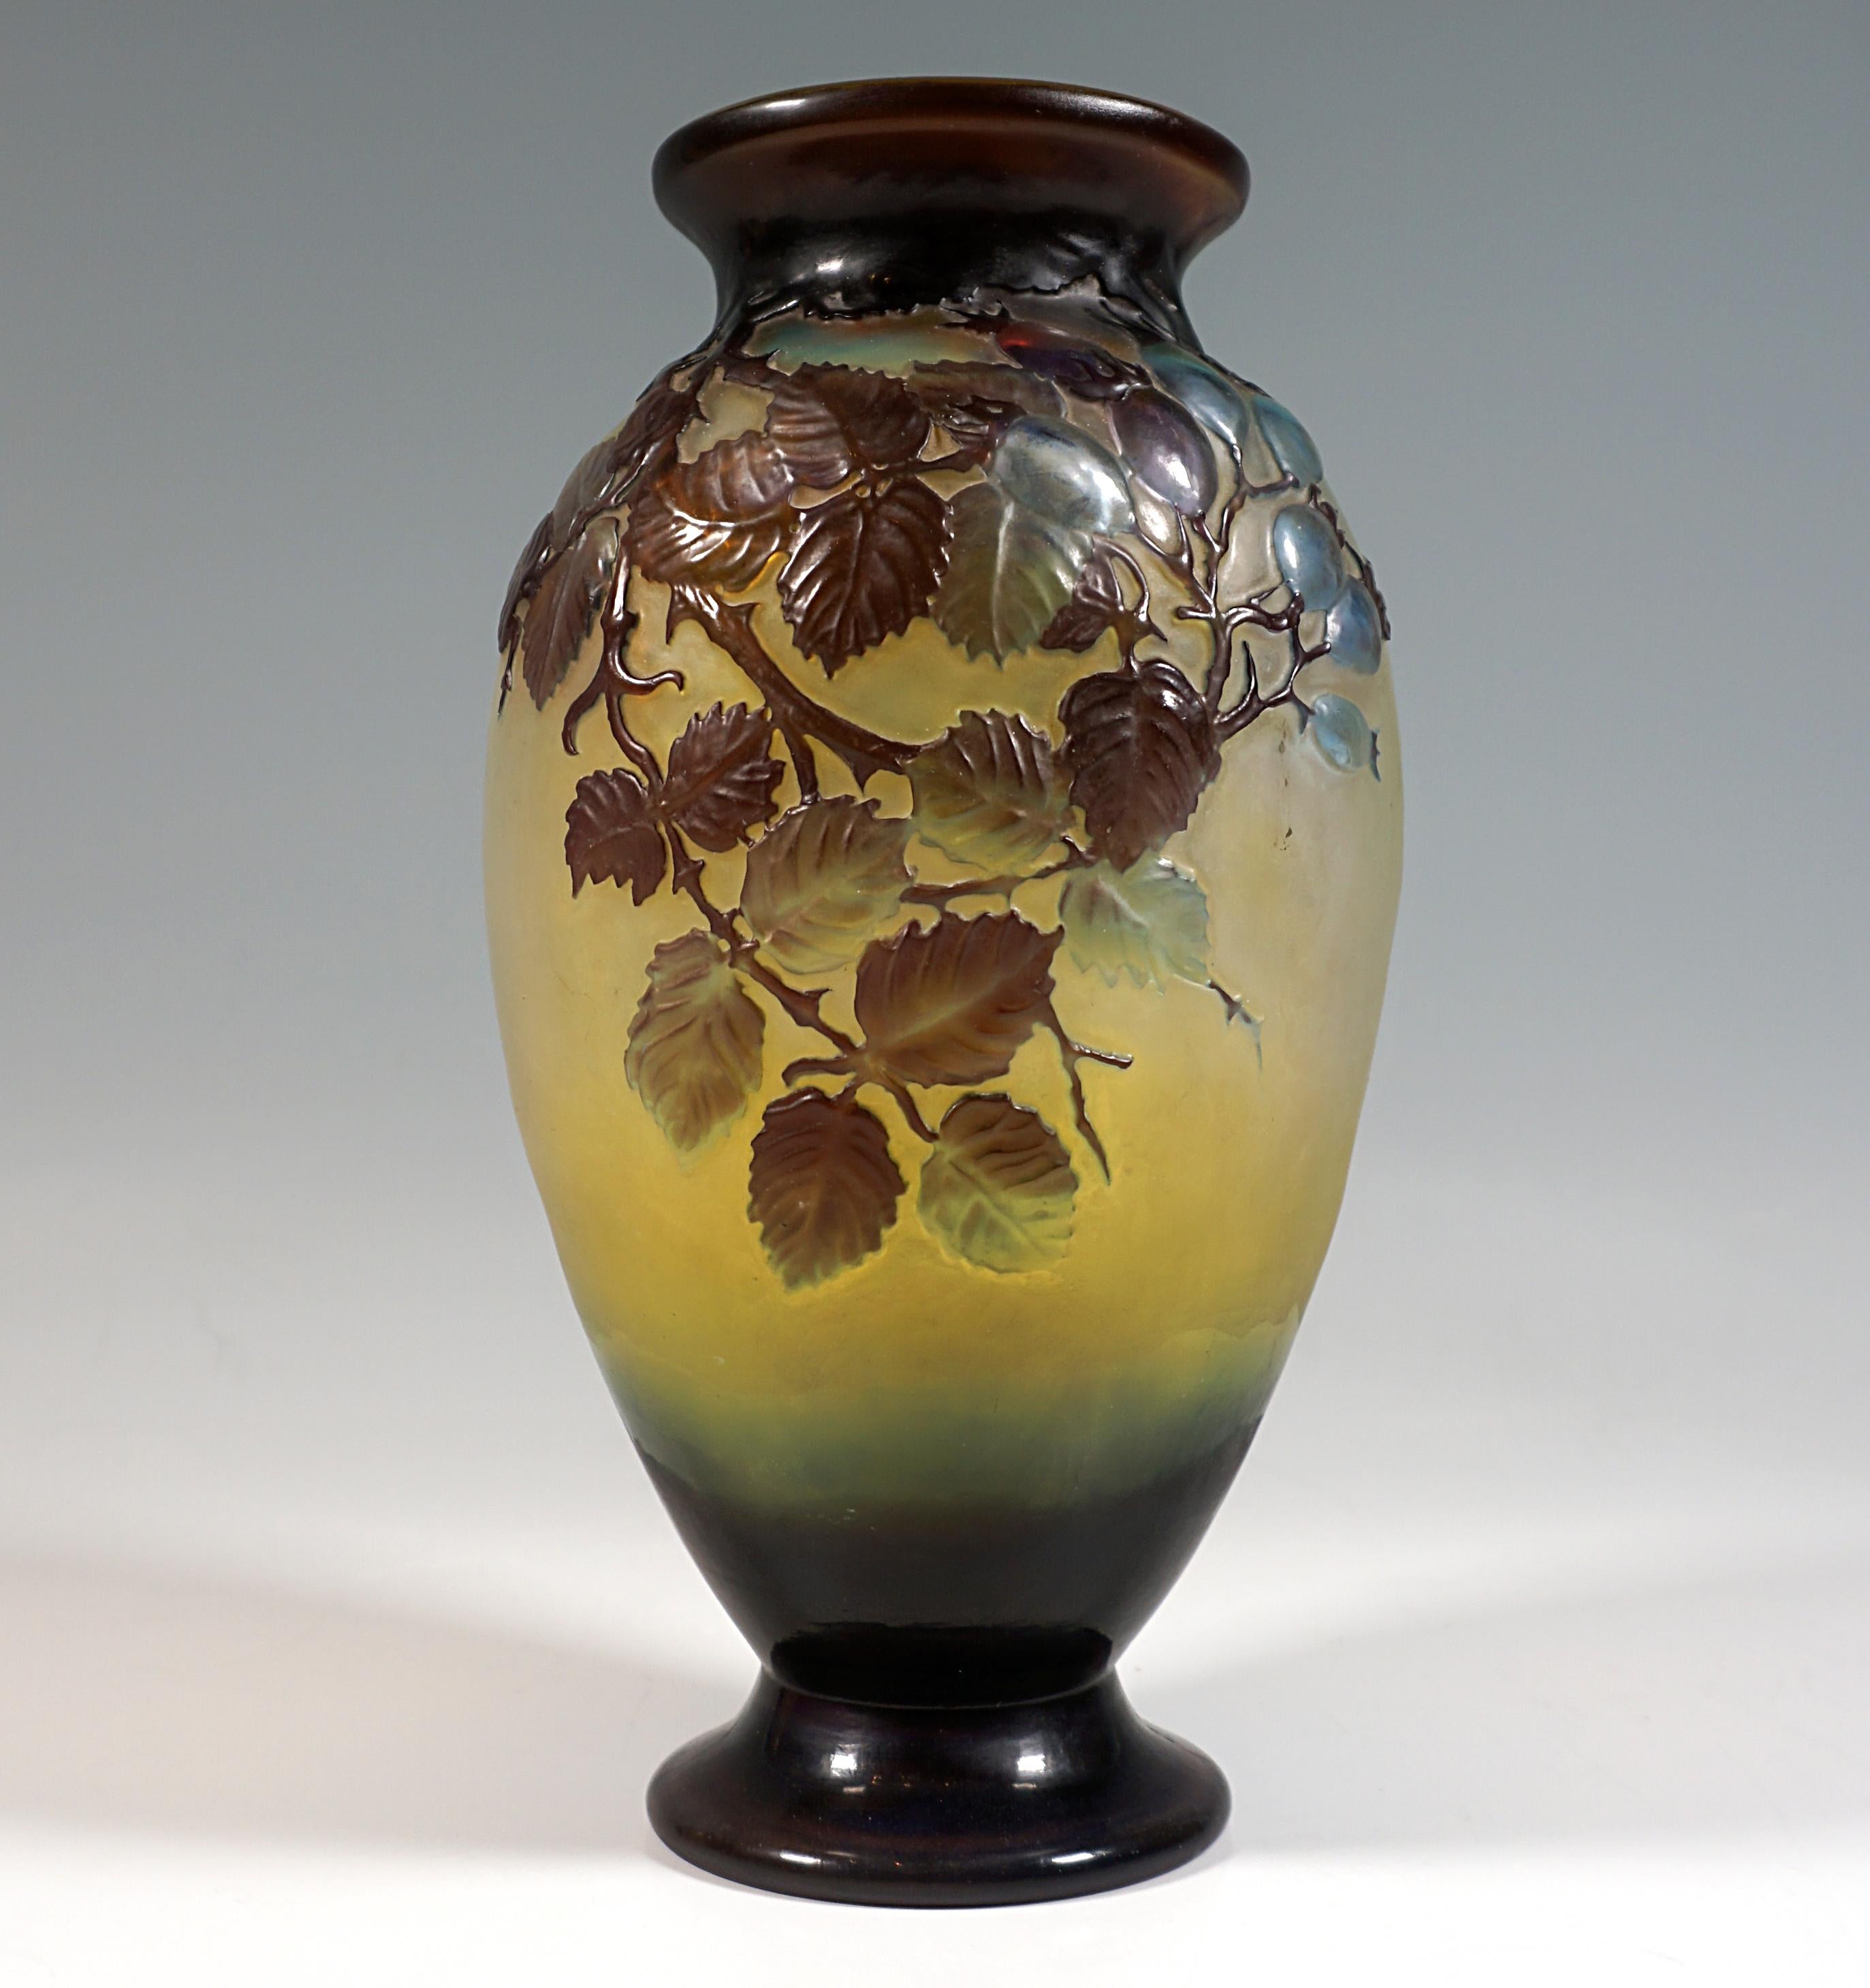 GORGEOUS AS WELL AS MOST REMARKABLE GALLÉ NANCY ART NOUVEAU SOUFFLÉ GLASS VASE :  Made in France  /  Nancy,  Lorraine, circa 1925. 

DETAILED INFORMATIONS:
A WILD-ROSE MOLD-BLOWN, OVERLAID AND ETCHED GLASS VASE (Emile Galle). -  The frosted